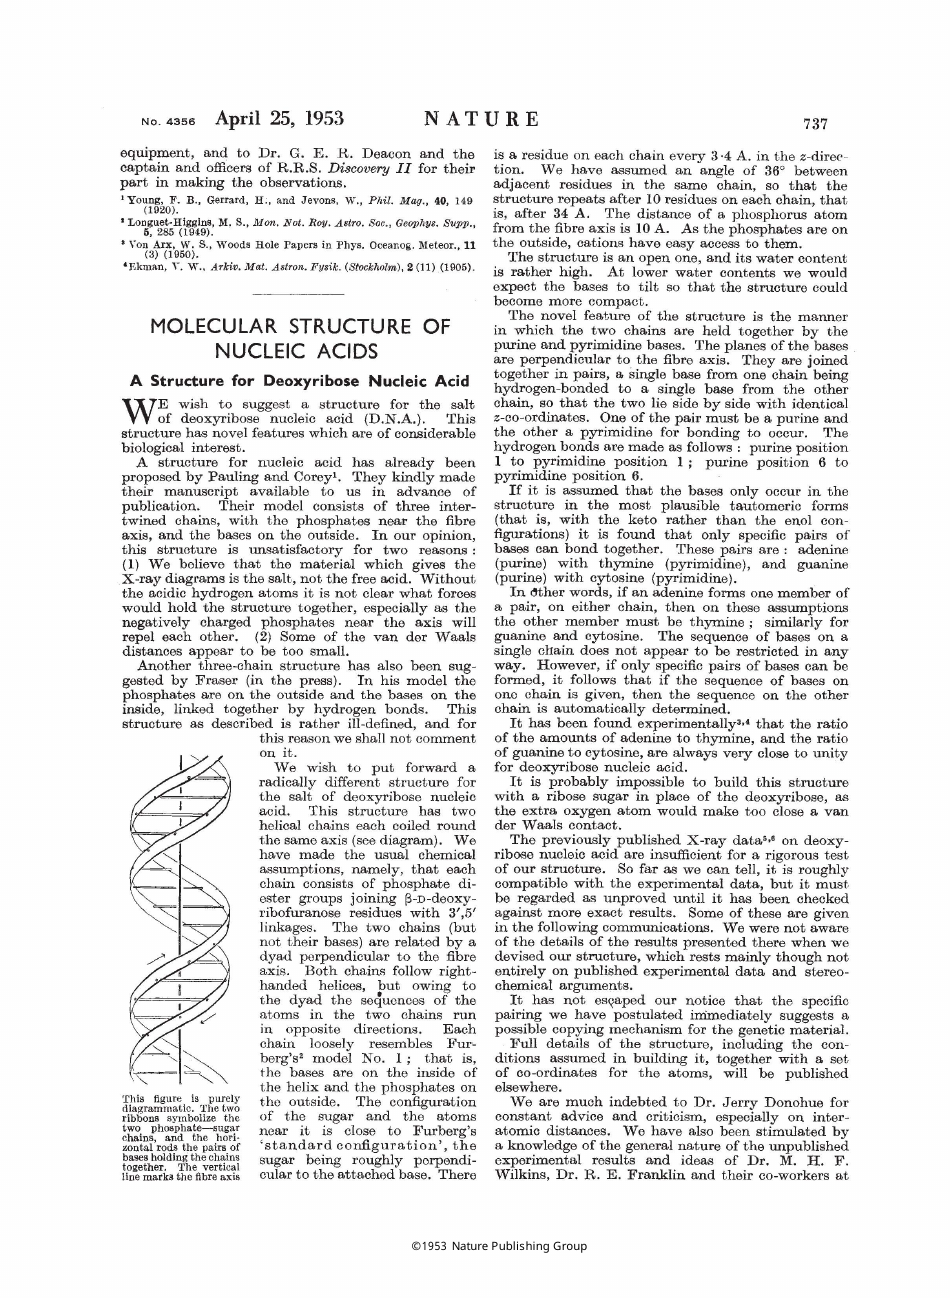 Molecular Structure of Nucleic Acids encompassing Deoxyribose Nucleic Acid - a defining study by renowned scientists J.D. Watson and F.H.C. Crick.